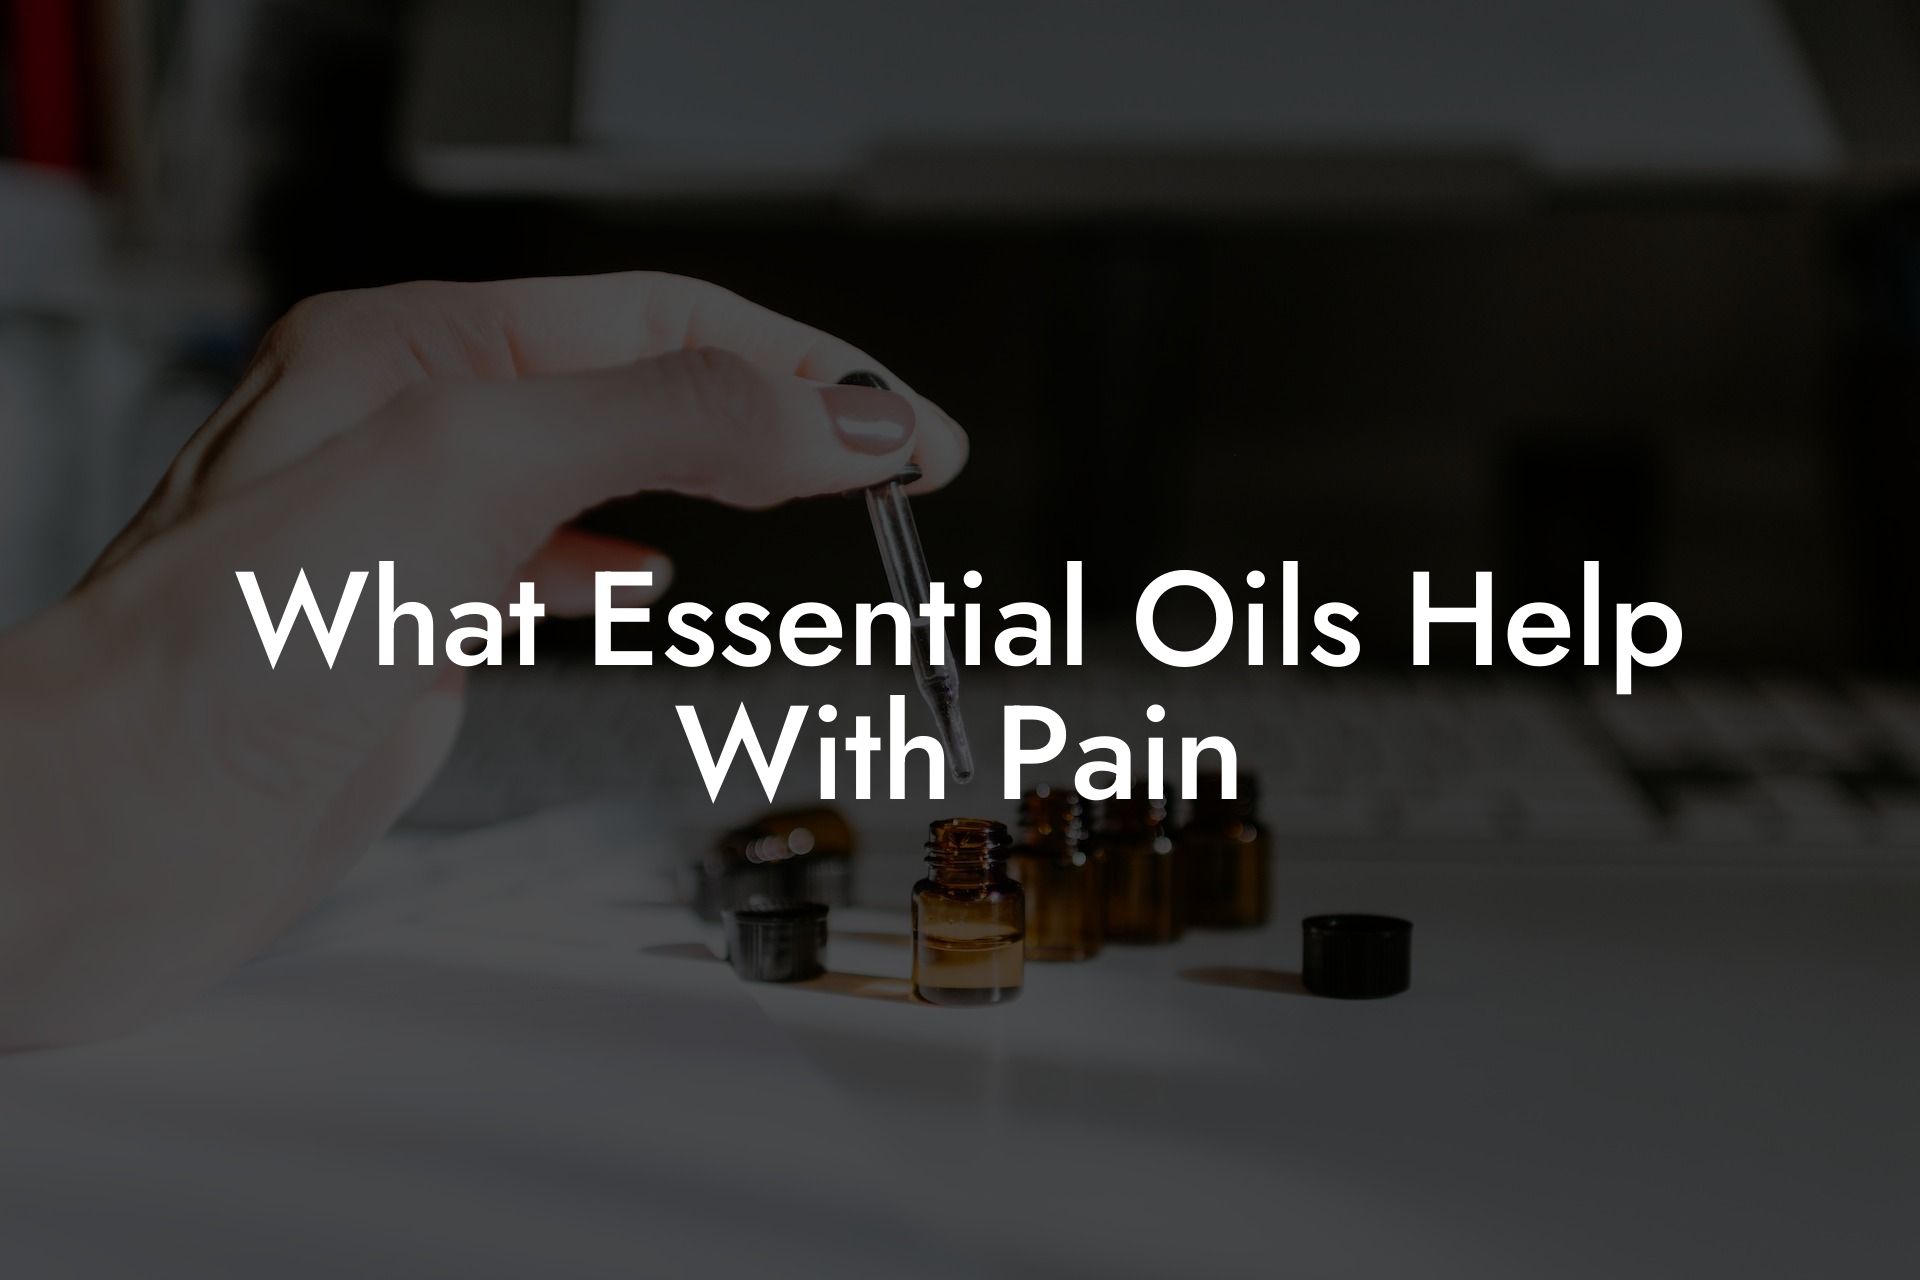 What Essential Oils Help With Pain